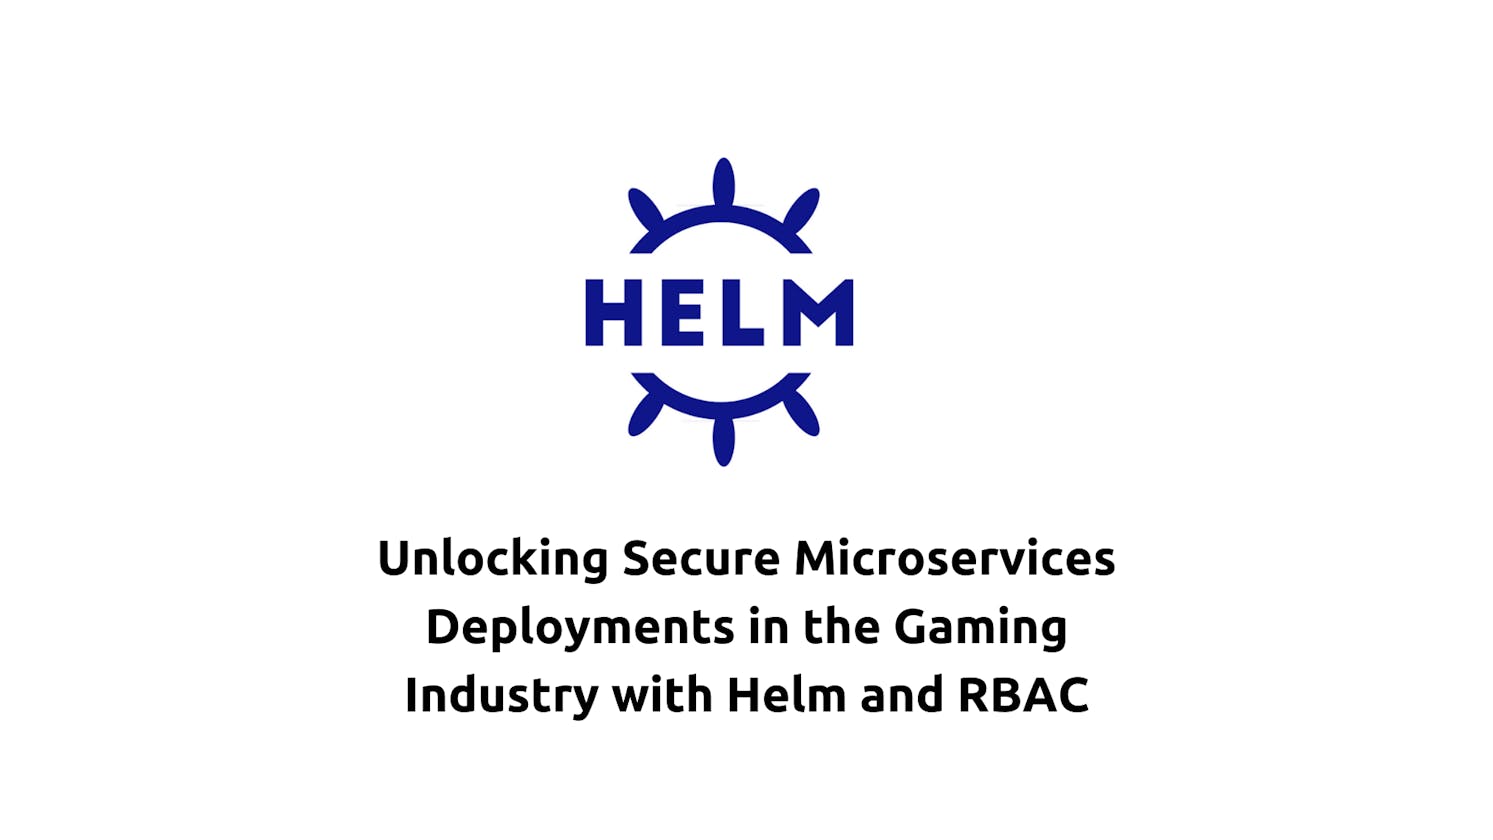 Unlocking Secure Microservices Deployments in the Gaming Industry with Helm and RBAC